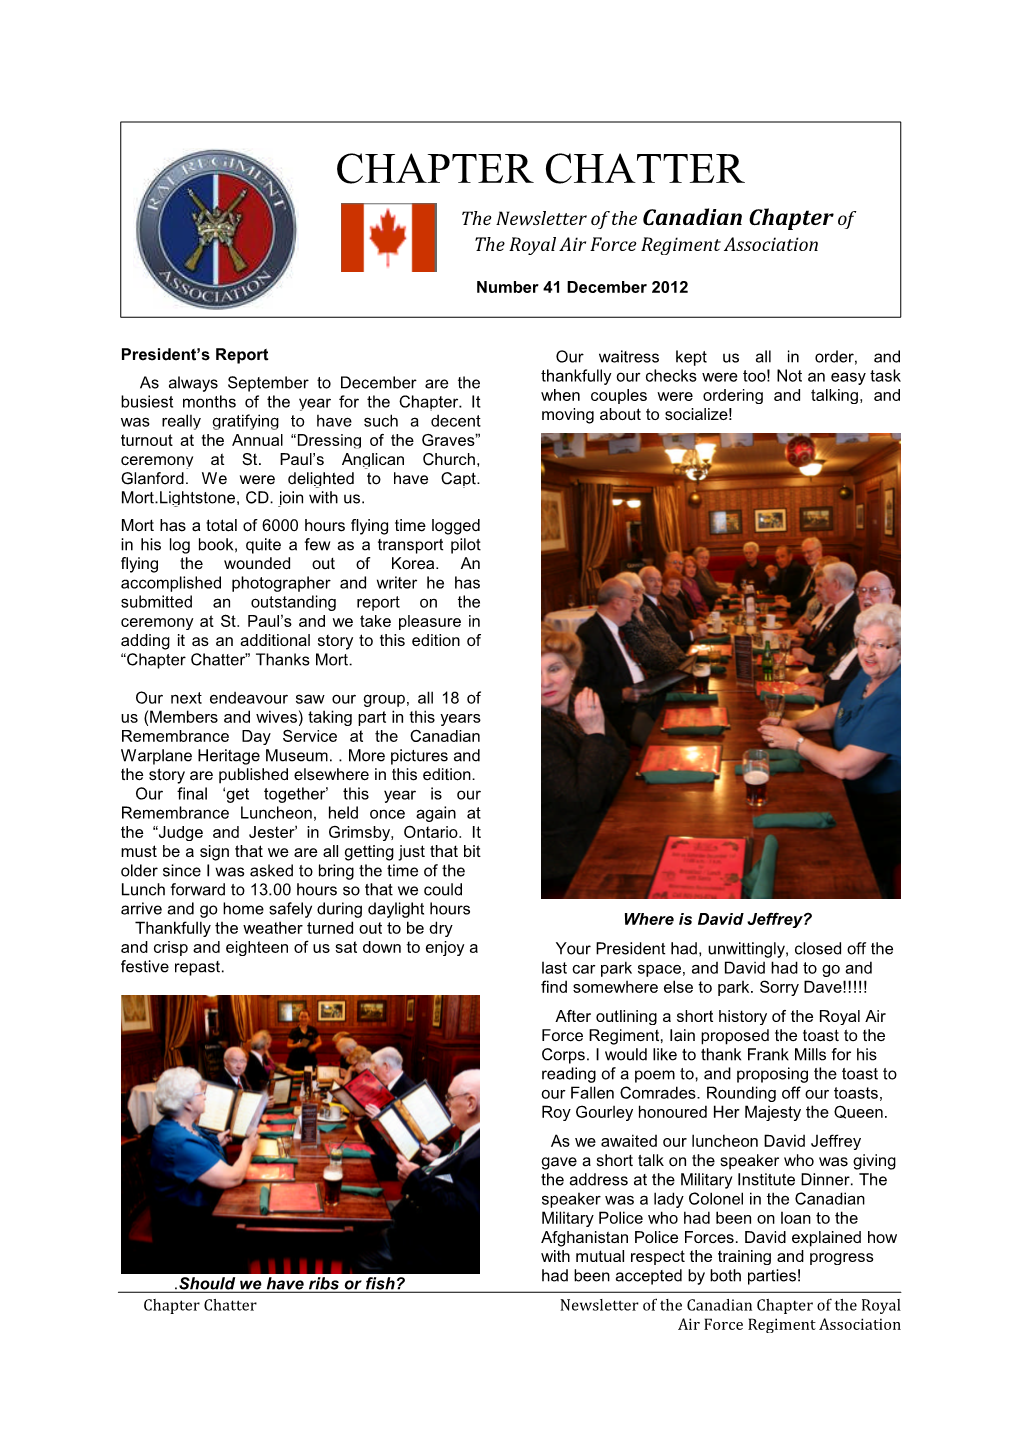 CHAPTER CHATTER the Newsletter of the Canadian Chapter of the Royal Air Force Regiment Association